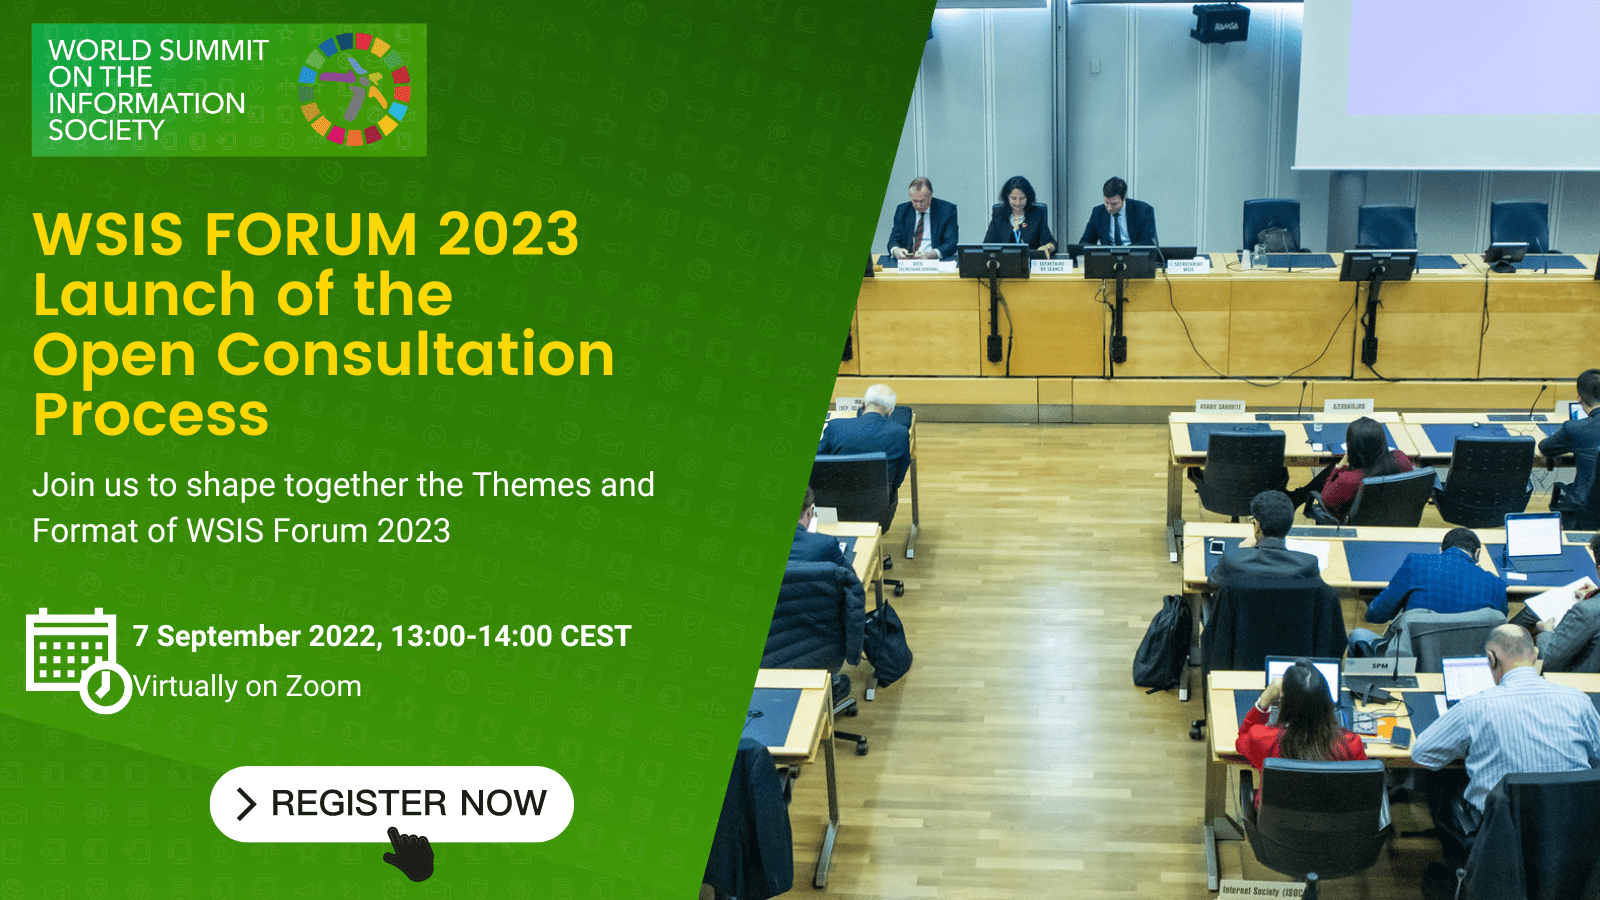 Launch of the WSIS Forum 2023 Open Consultation Process, 7 September 2022